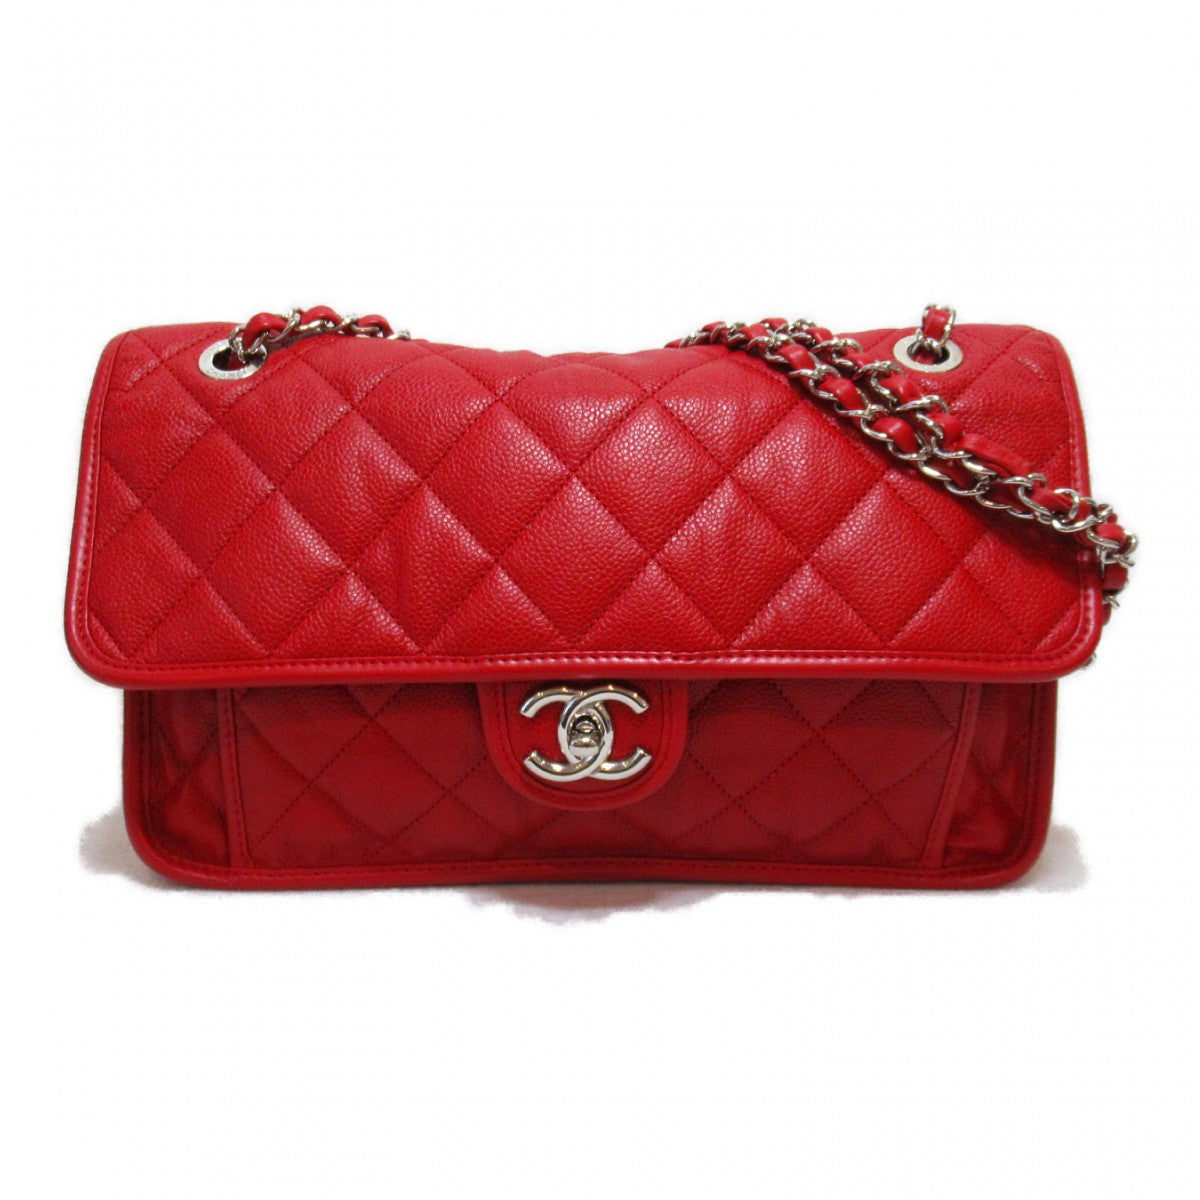 CC Quilted Caviar French Riviera Flap Bag